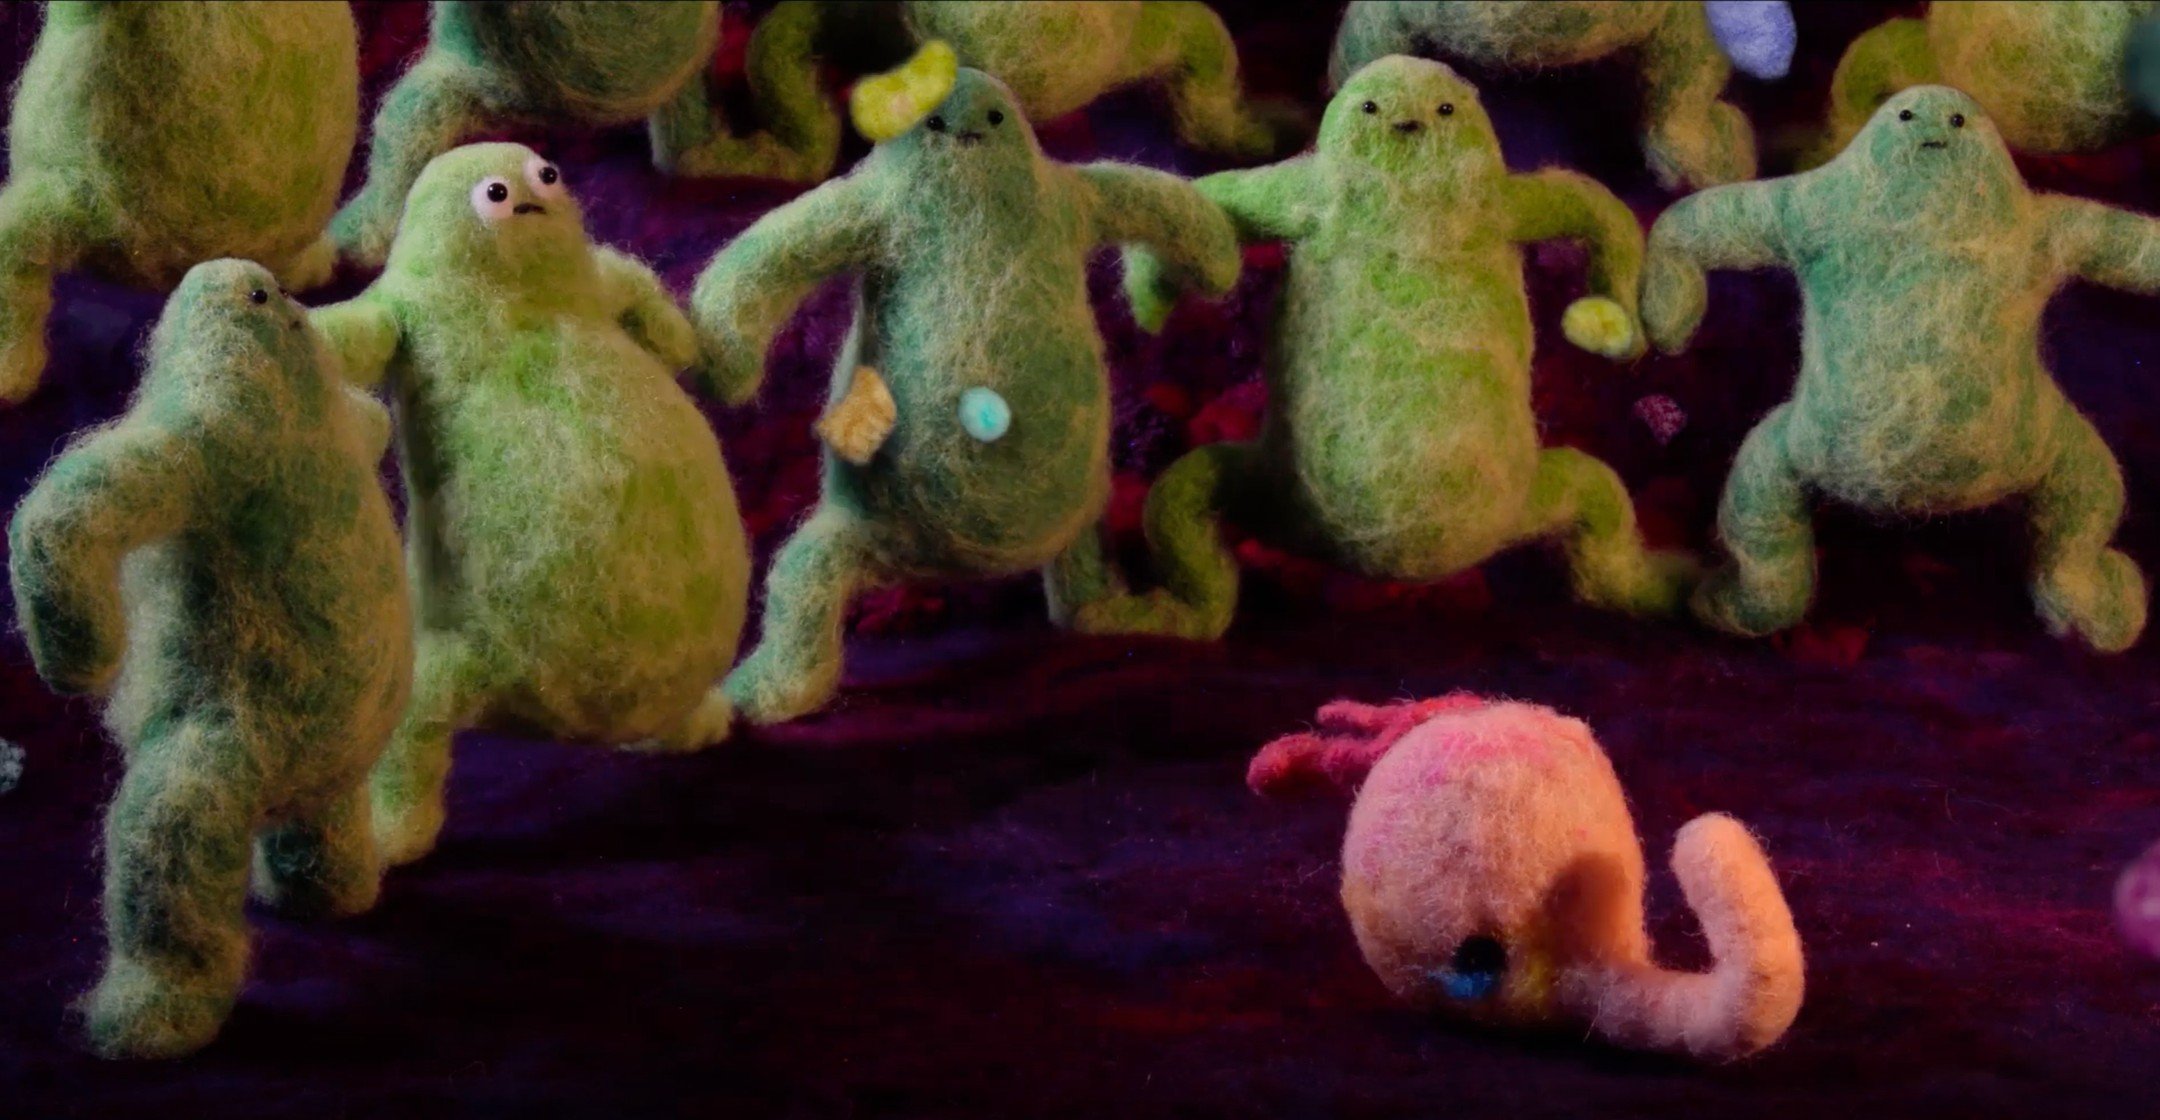 MUCOUS MEMBRANES.
We played with tons of ideas about how to illustrate this section of the film. We thought about childhood video games, bouncers at a club and RED ROVER. And this is what we ended up with.

Thanks to @netflix @tremolodocs for allowin